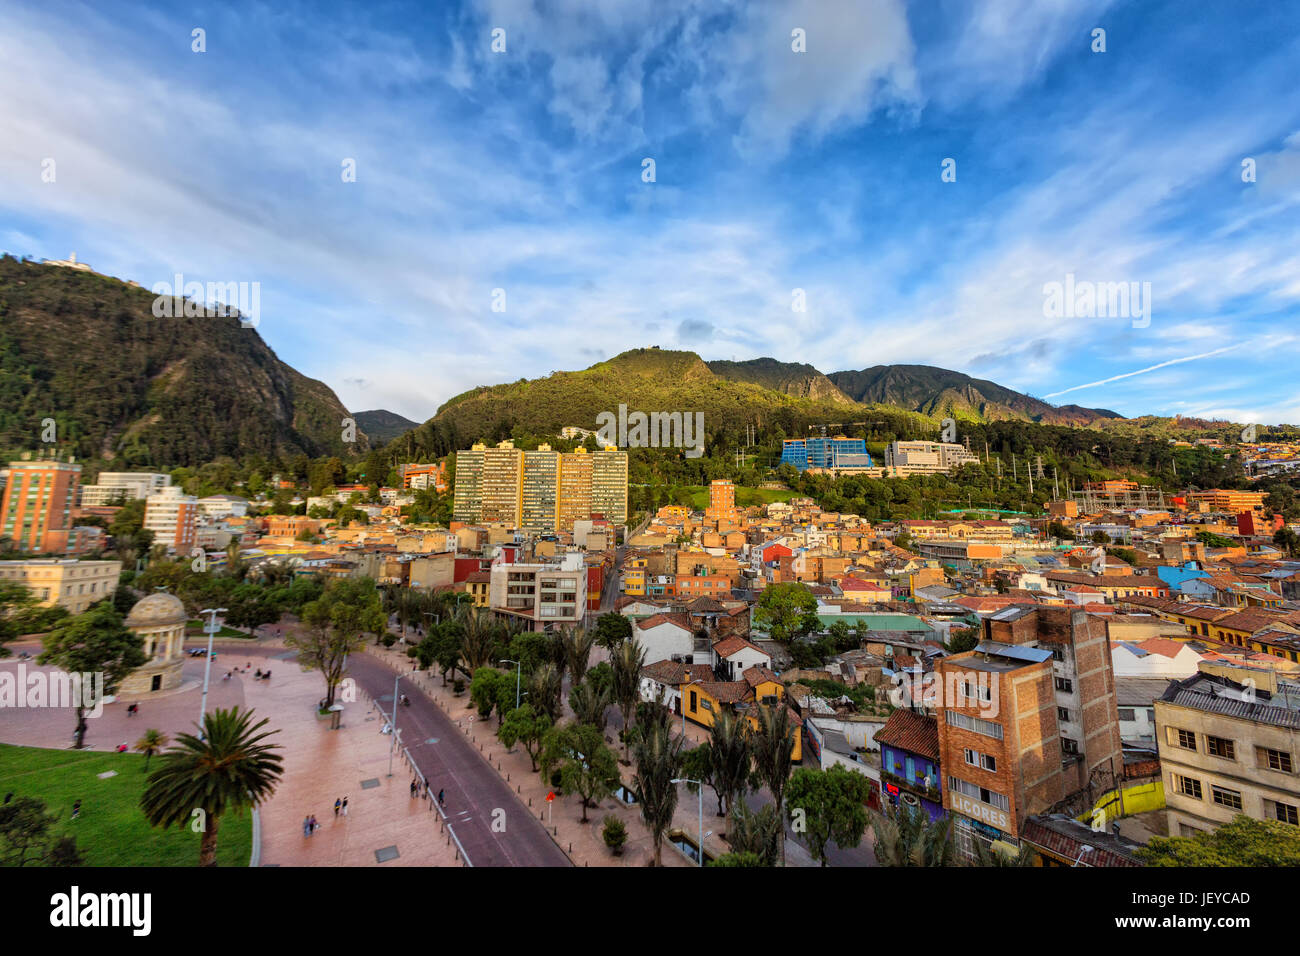 View of Journalist's Park with Monserrate and the candelaria district of Bogota, Colombia. Stock Photo